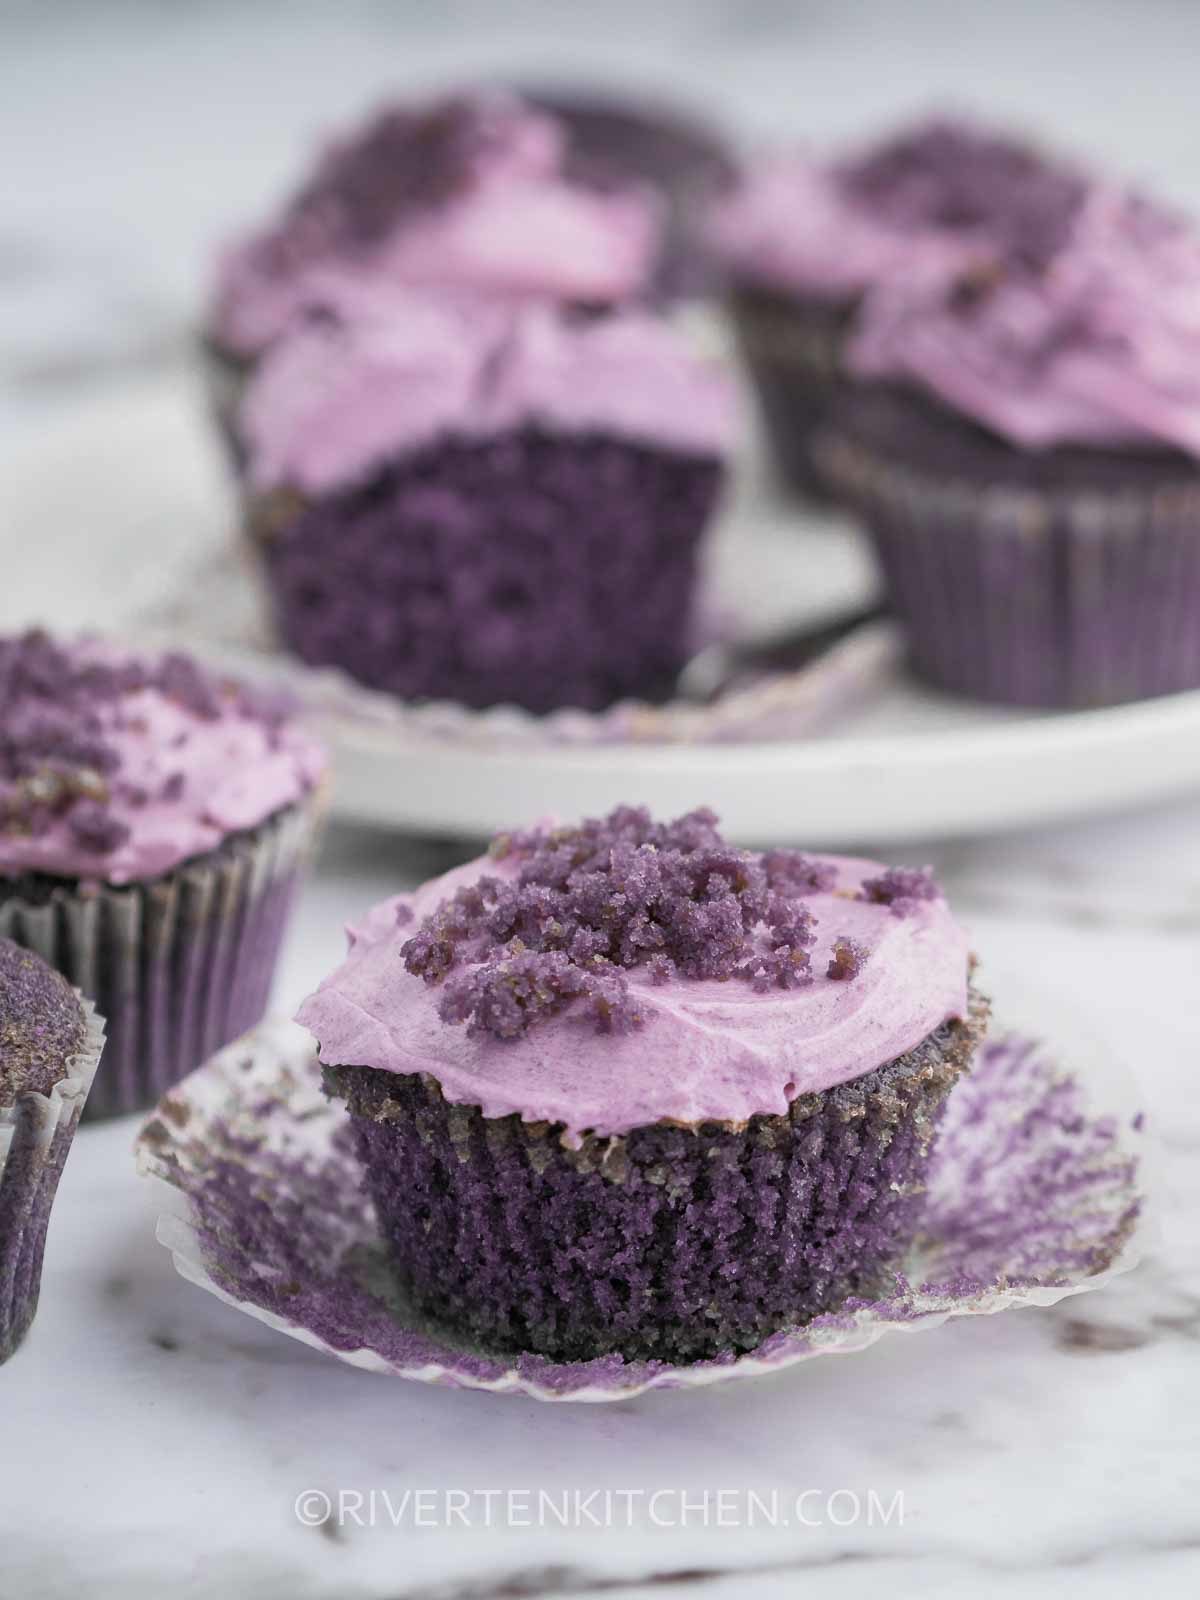 Ube Flavored Cupcakes with Frosting